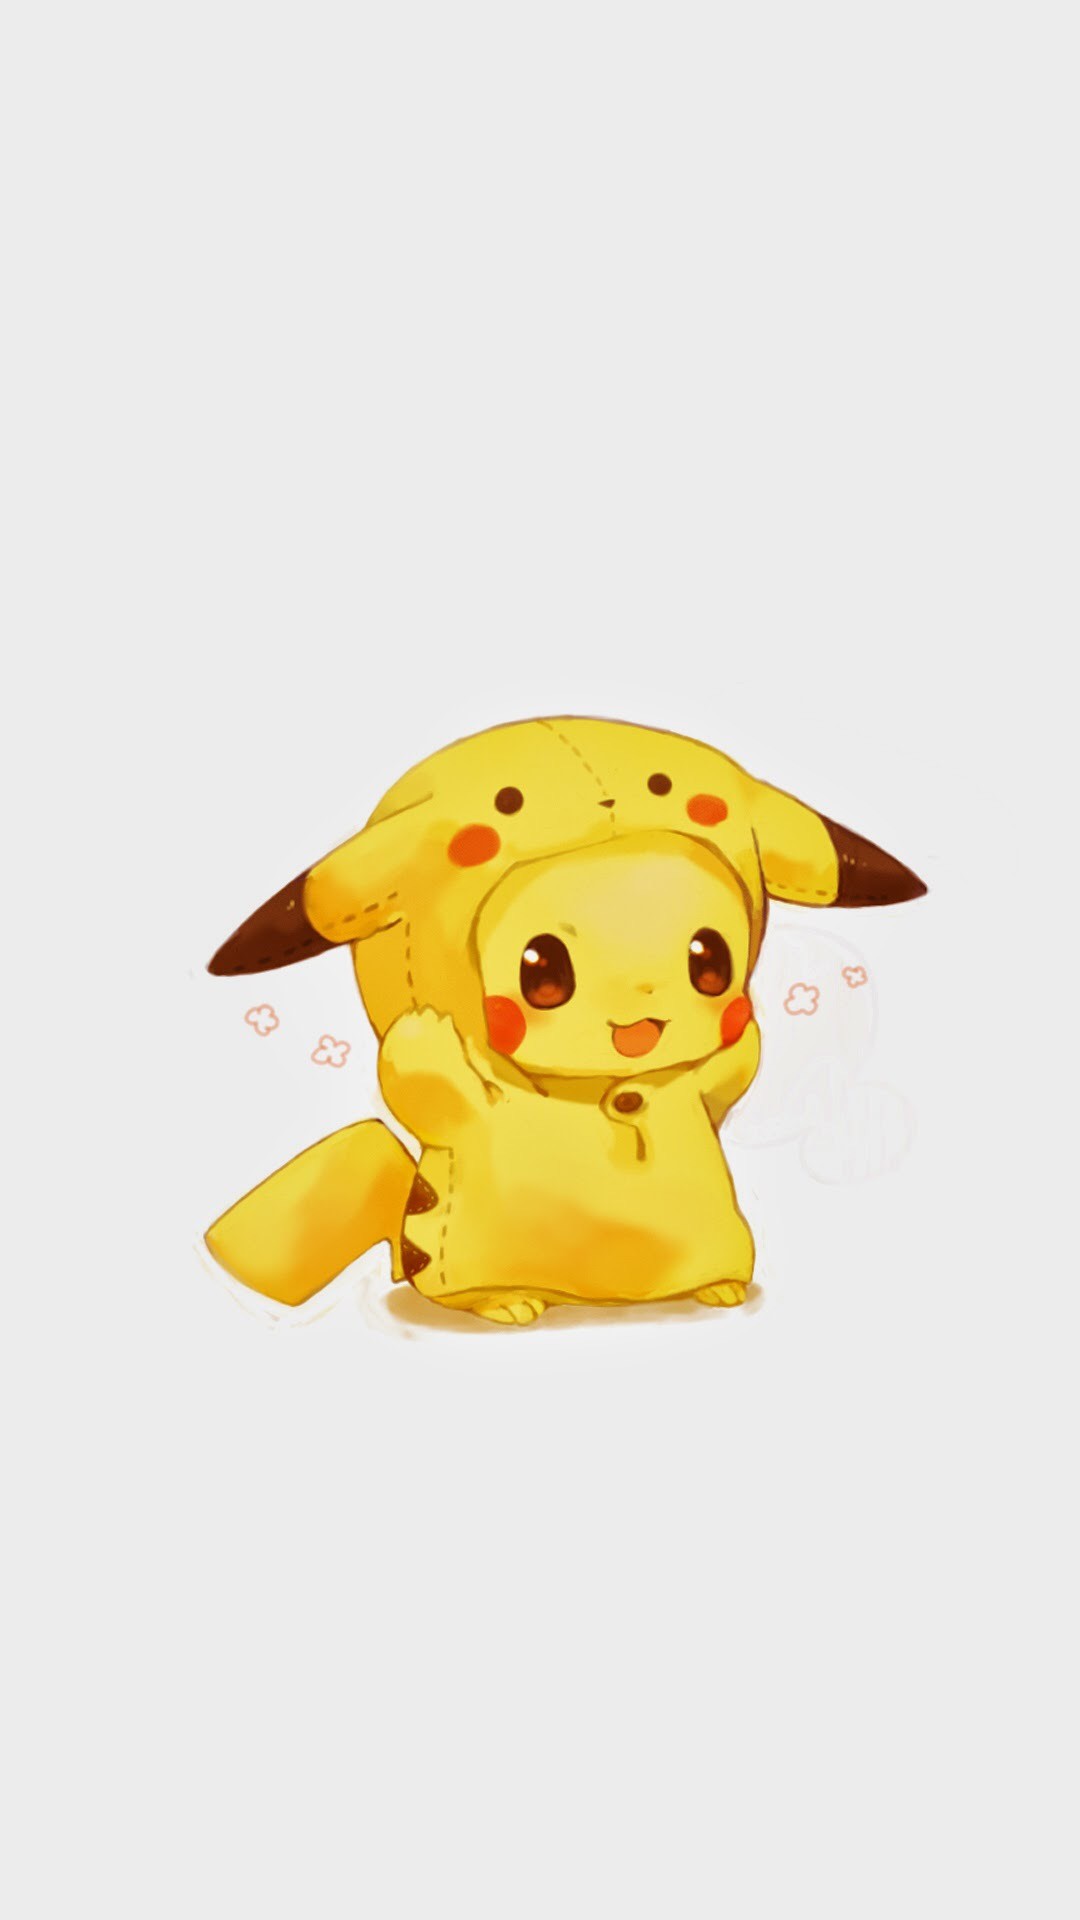 1080x1920 Tap-image-for-more-funny-cute-Pikachu-Pikachu-